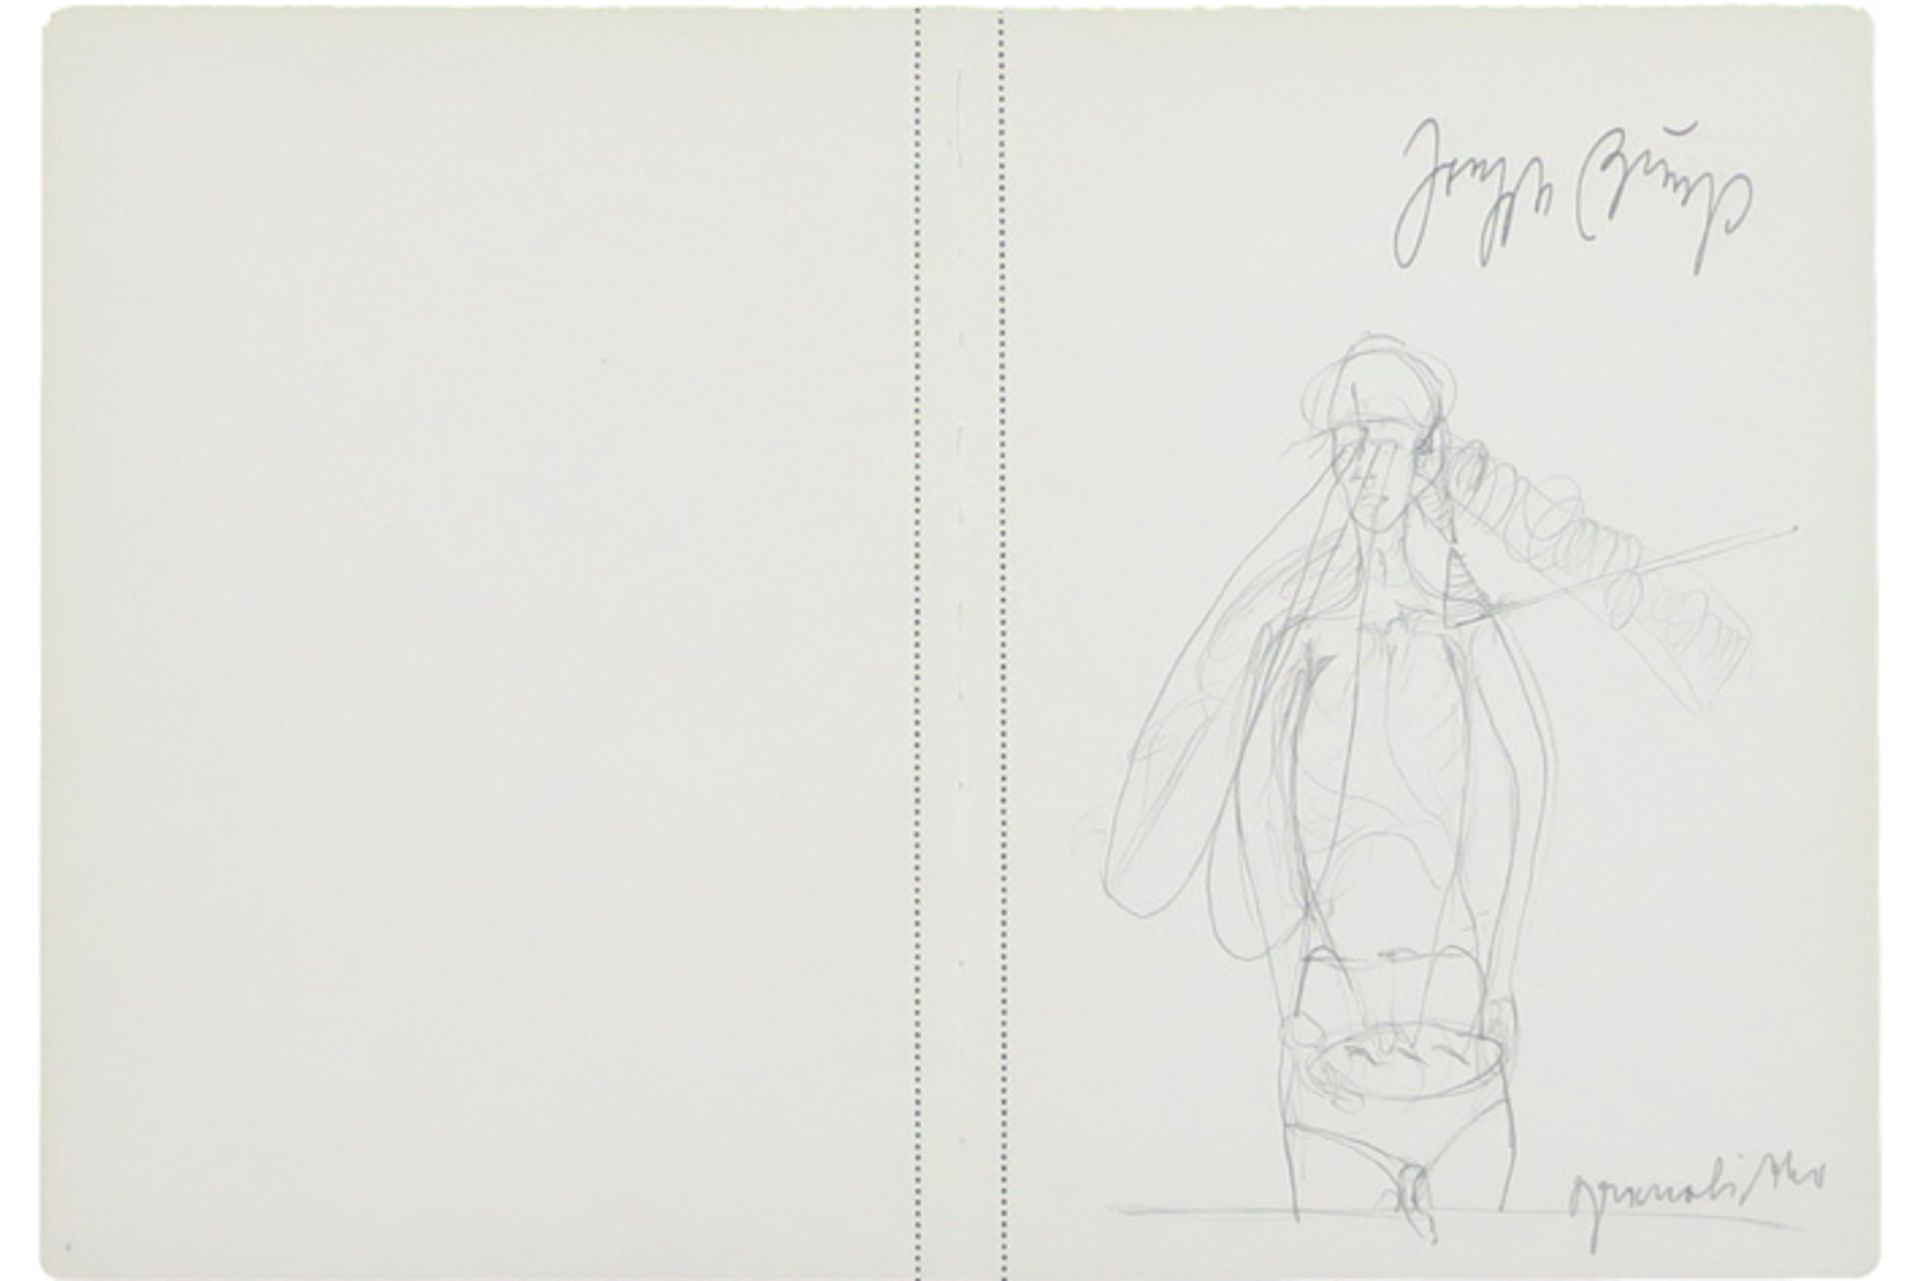 Joseph Beuys signed grano-lithography dd 1974 BEUYS JOSEPH (1921 - 1986) granolithografie (volledig,